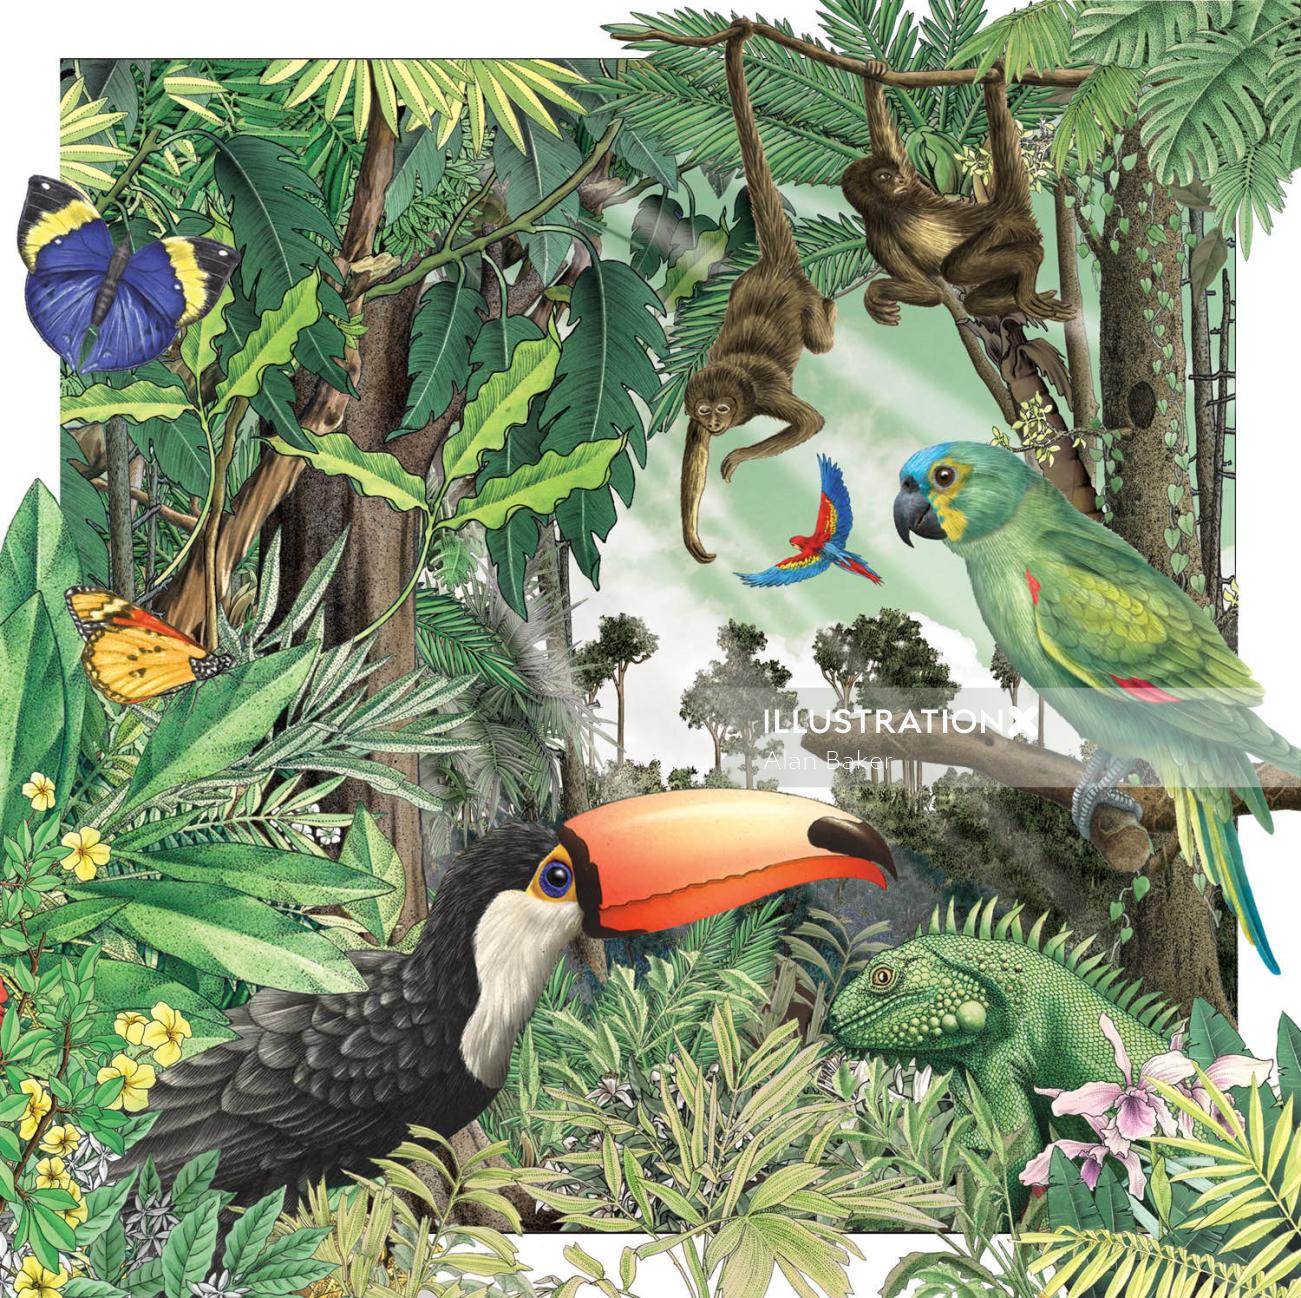 Illustration of birds in the forest  by Alan Baker